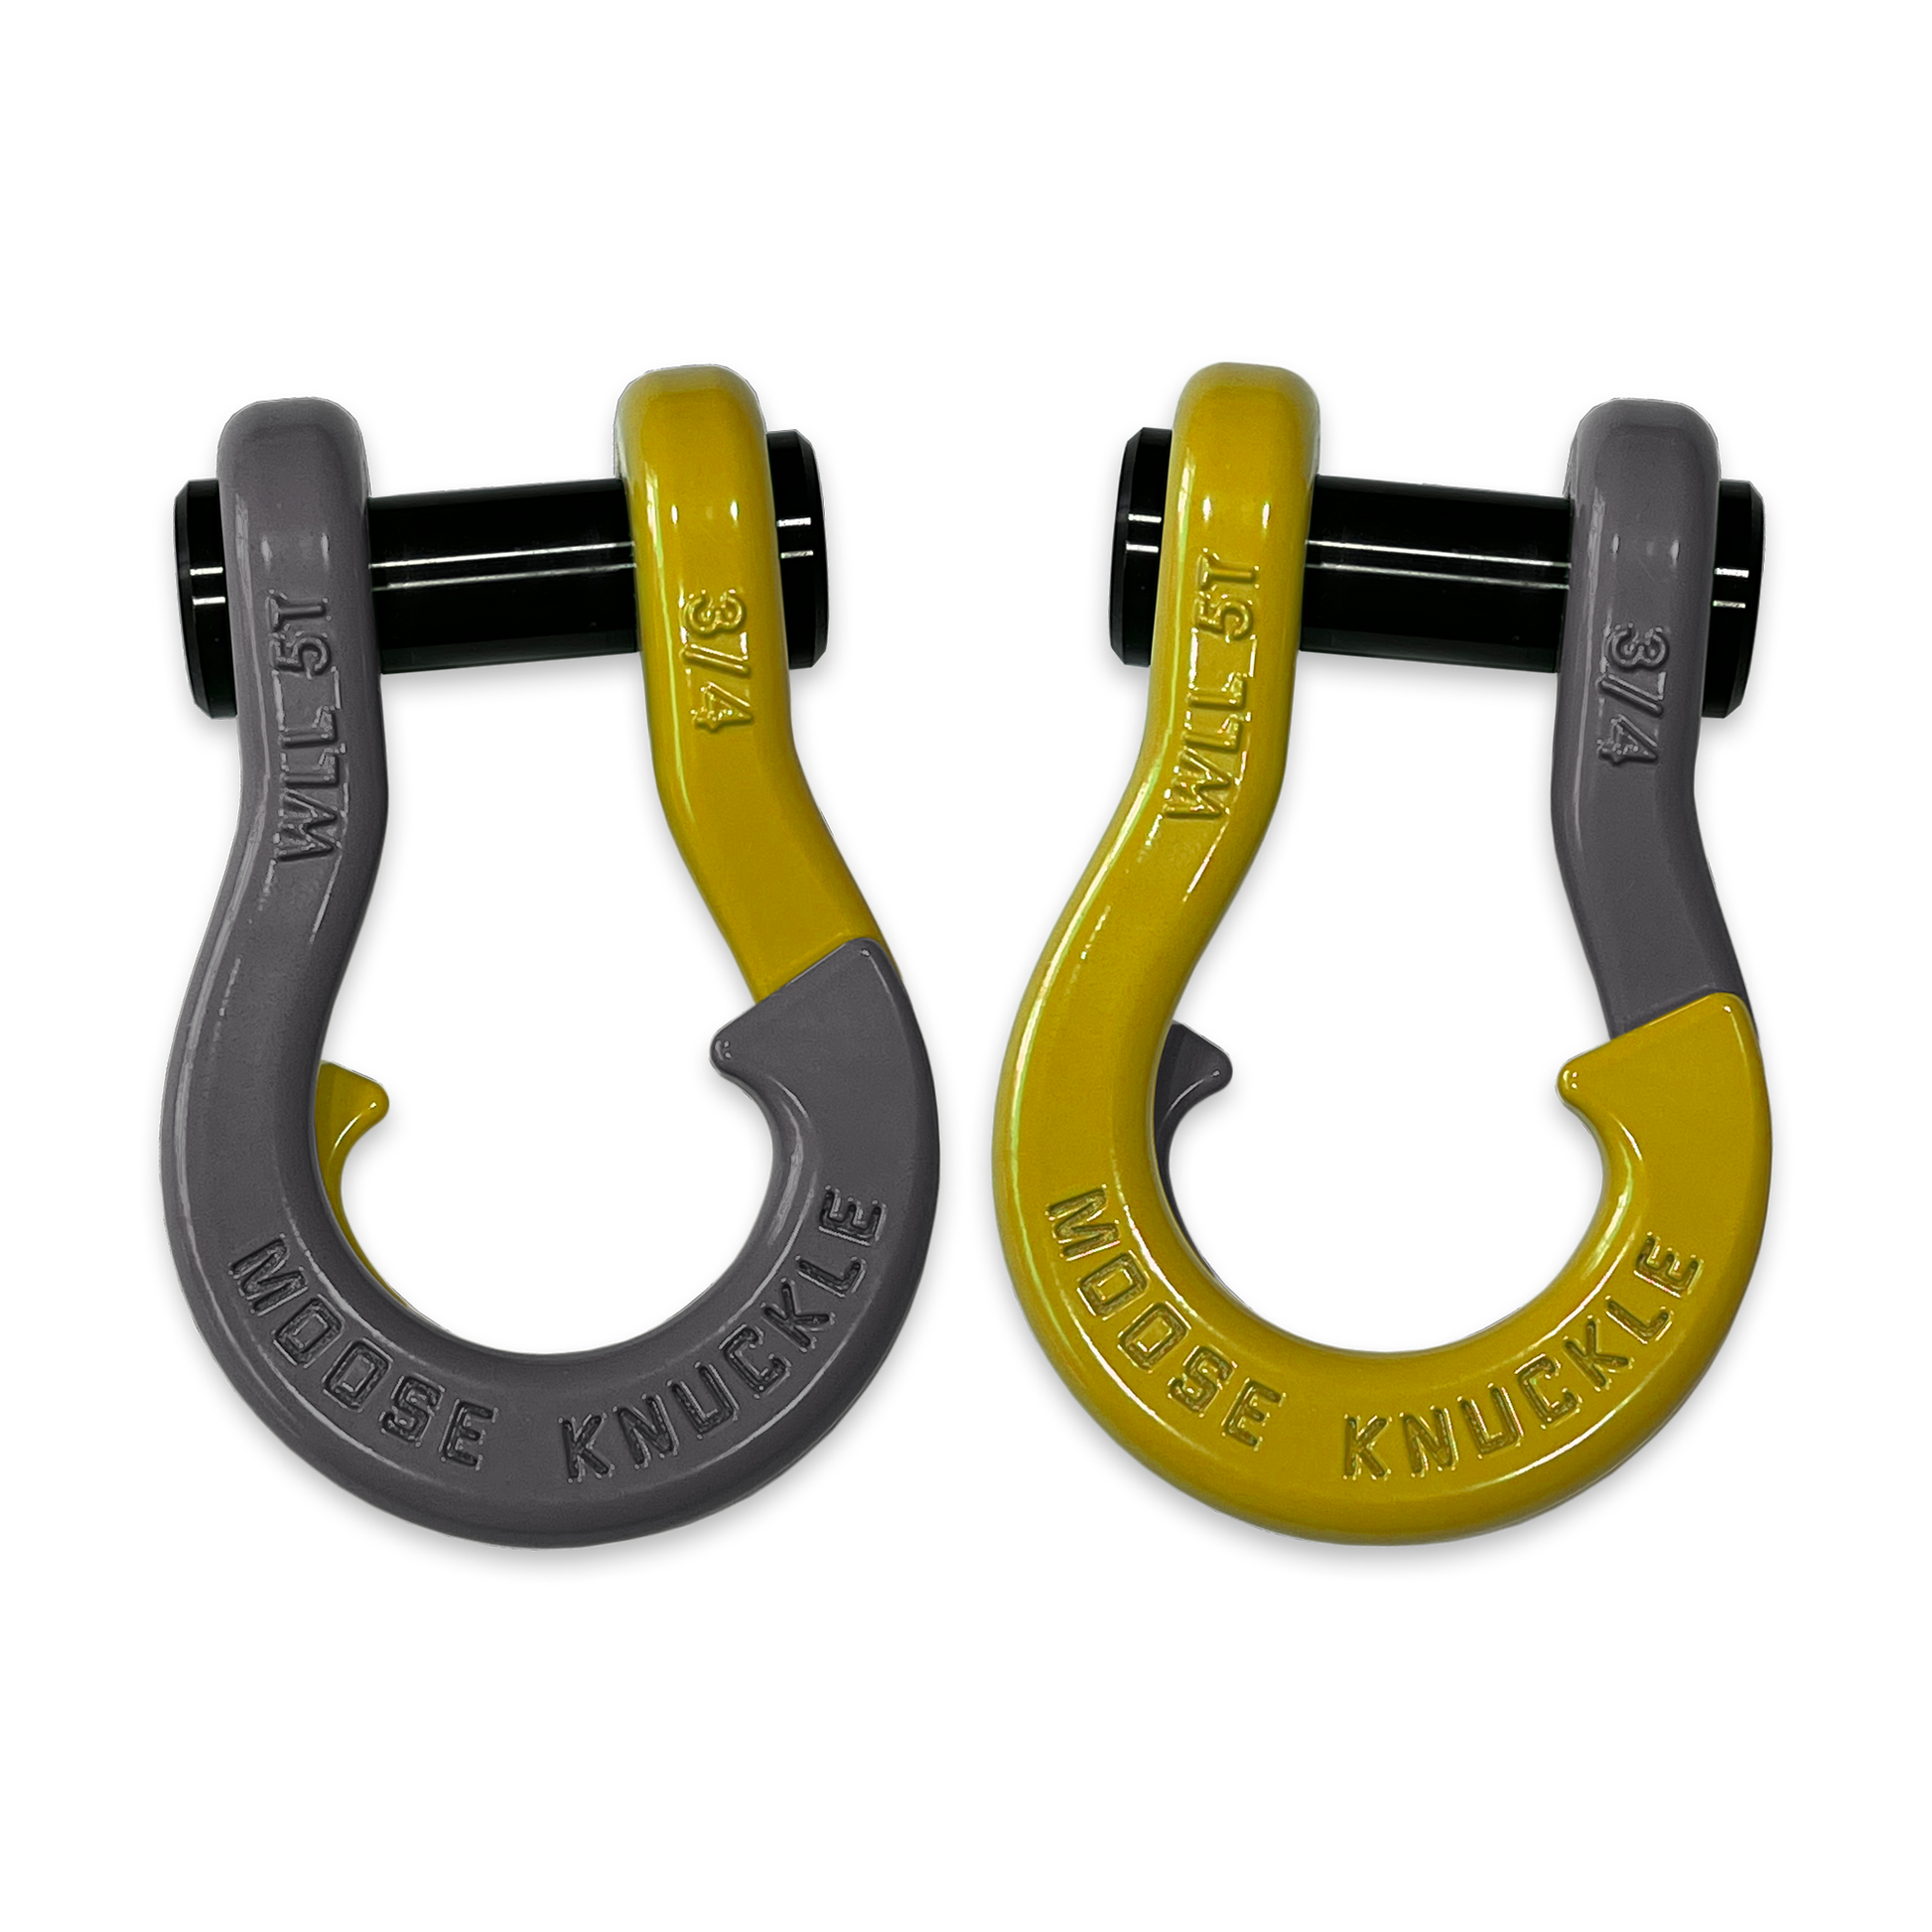 Moose Knuckle's Jowl Recovery Split Shackle 3/4 in Gun Gray and Detonator Yellow Combo